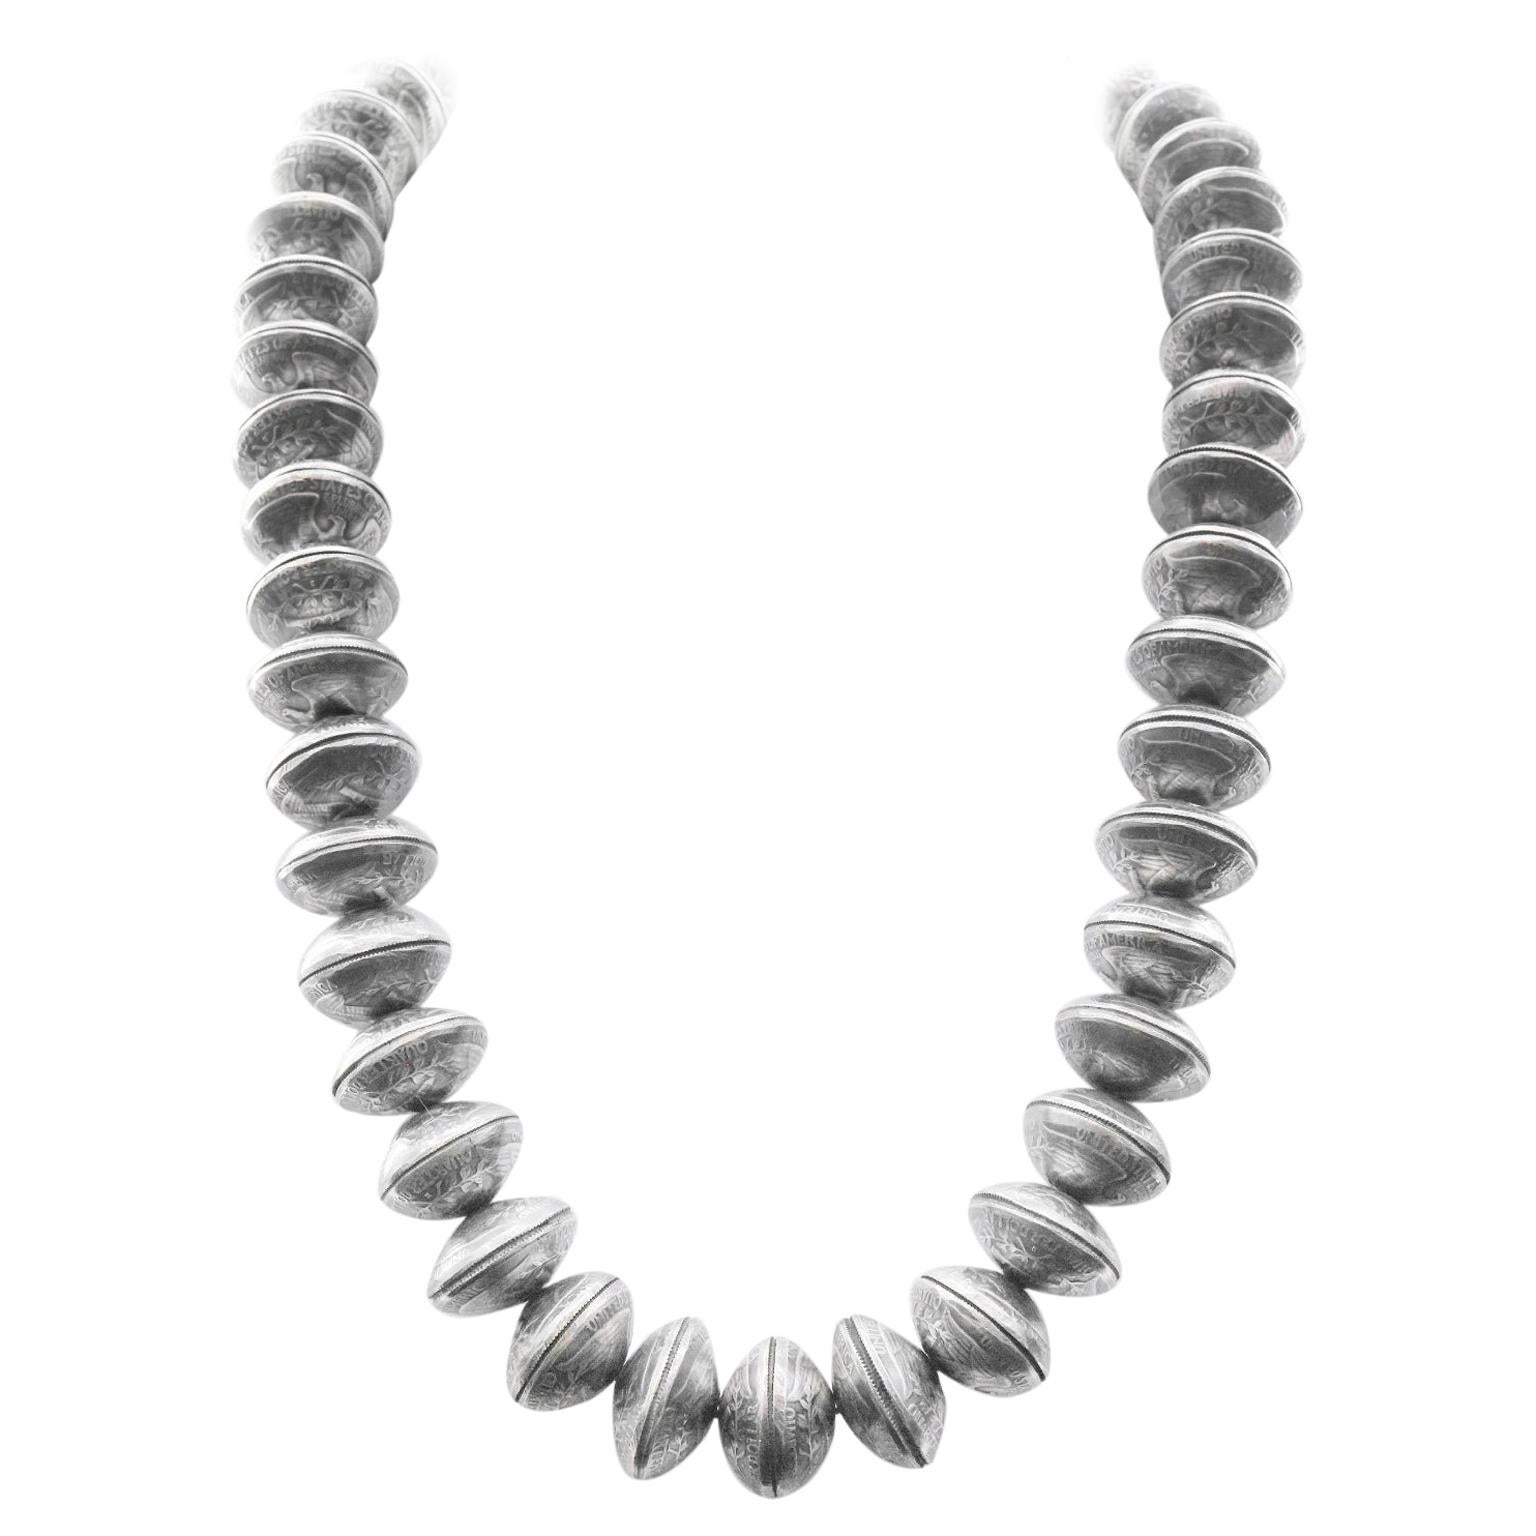 Heavy Navajo Bead Necklace, Coin Silver For Sale